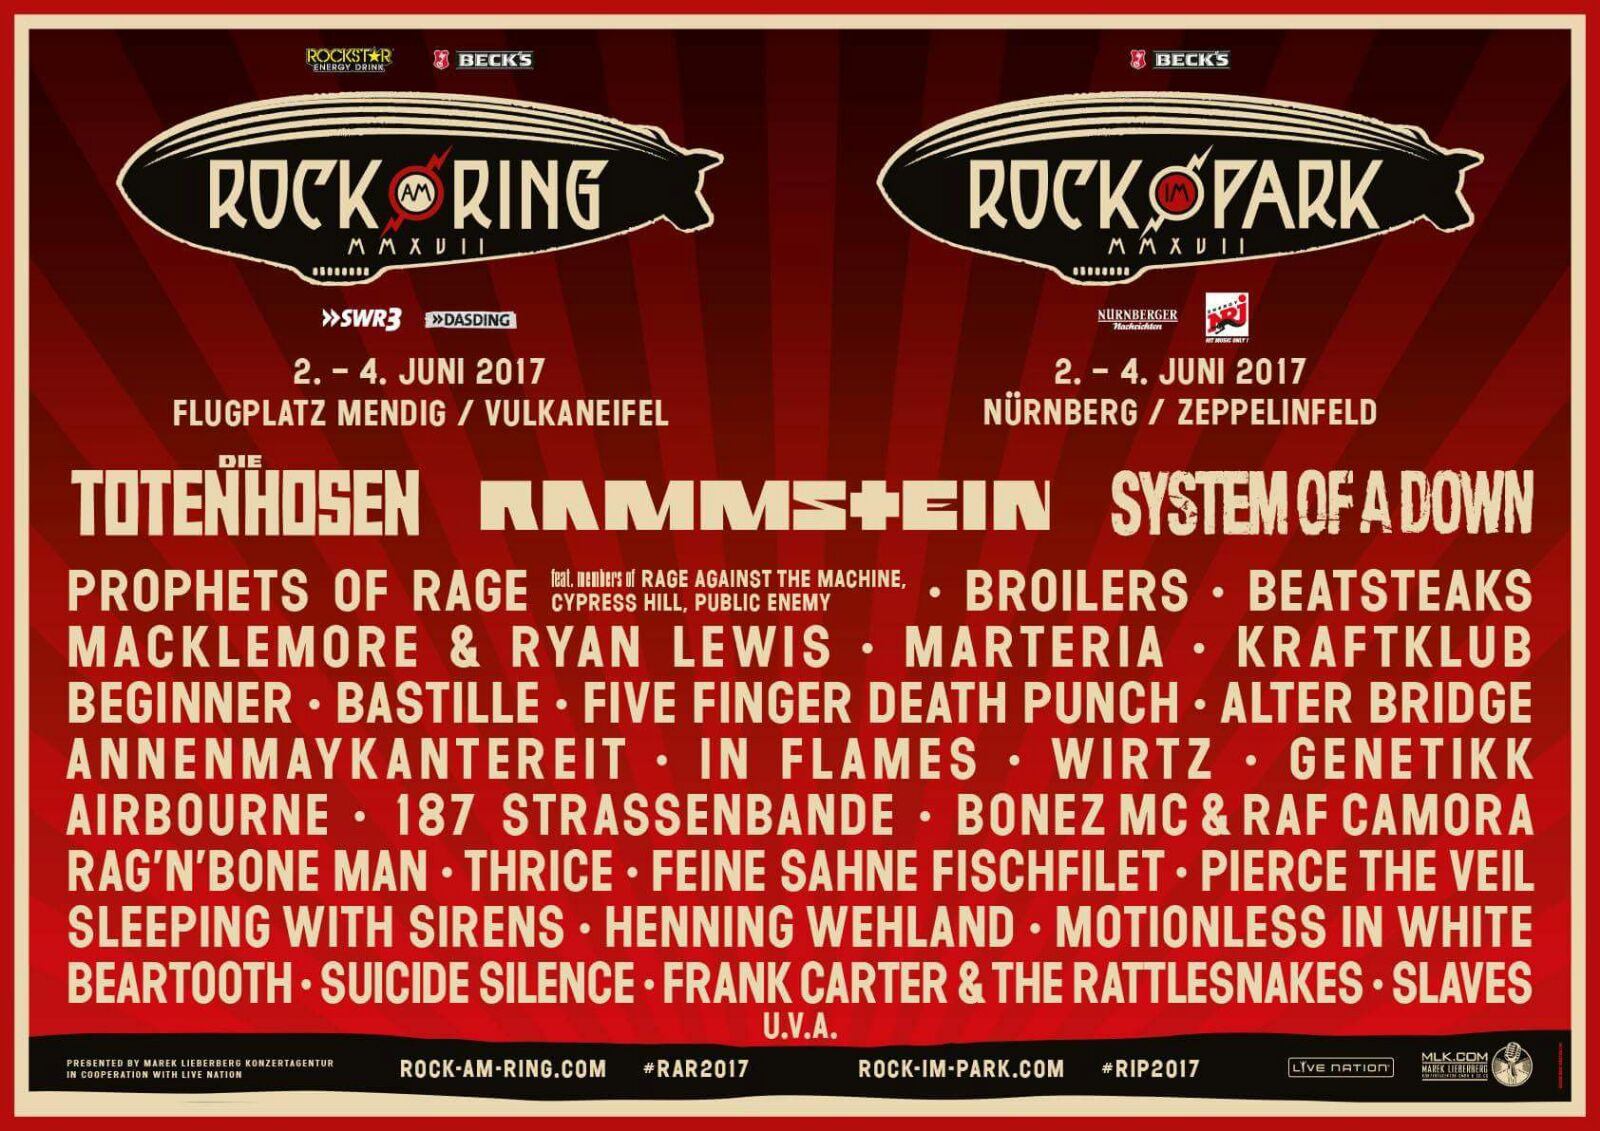 Rock am ring line up